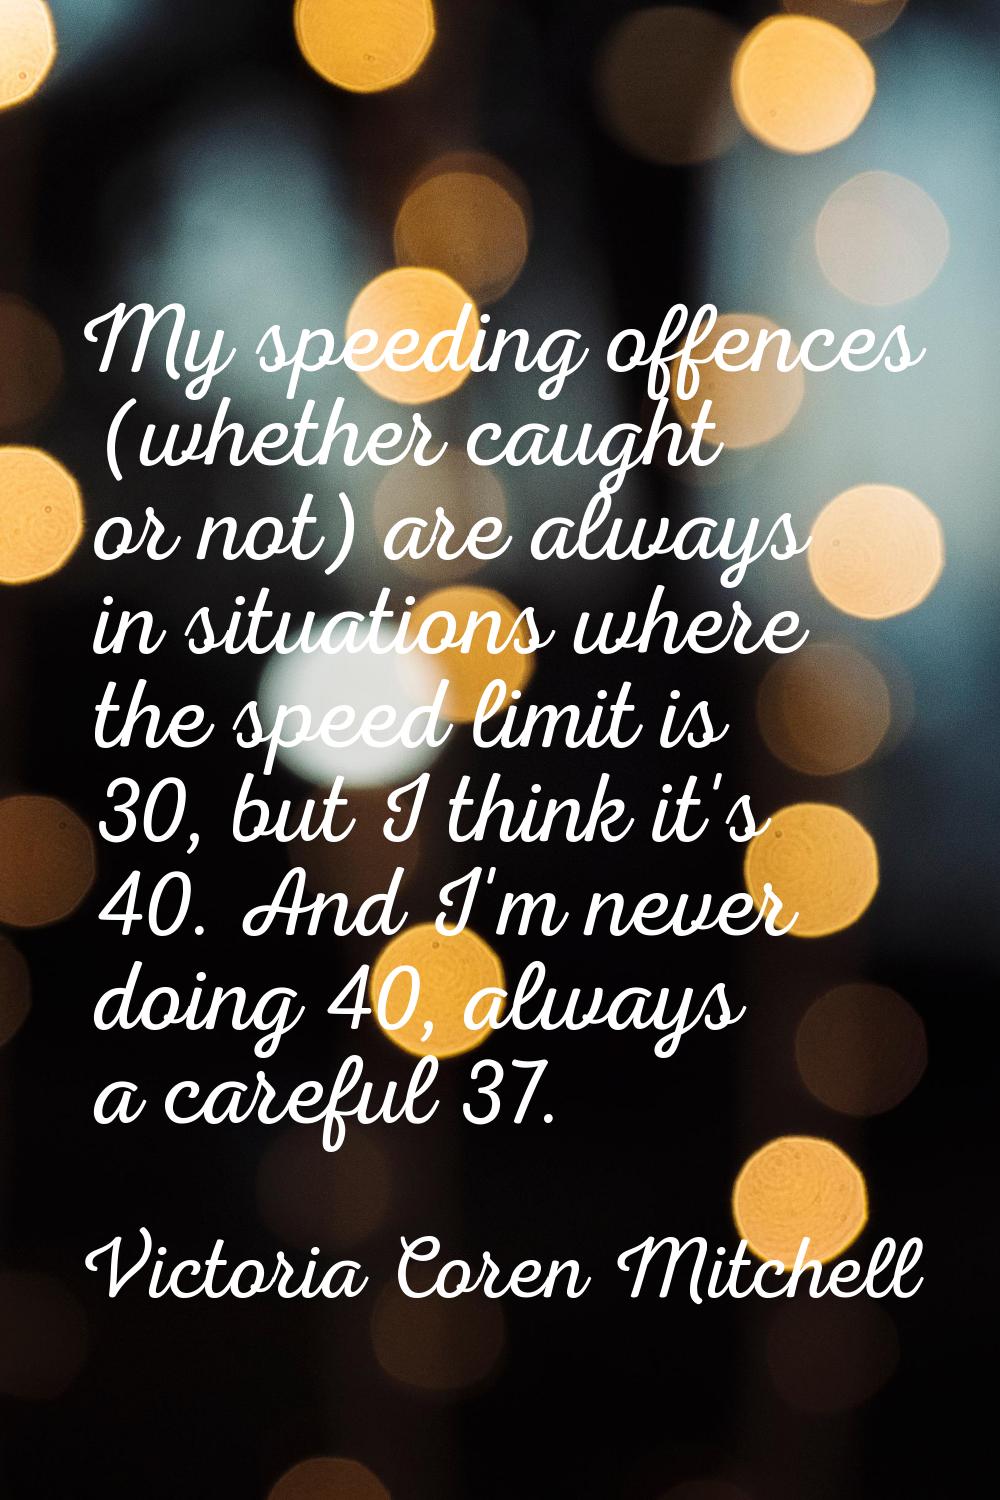 My speeding offences (whether caught or not) are always in situations where the speed limit is 30, 